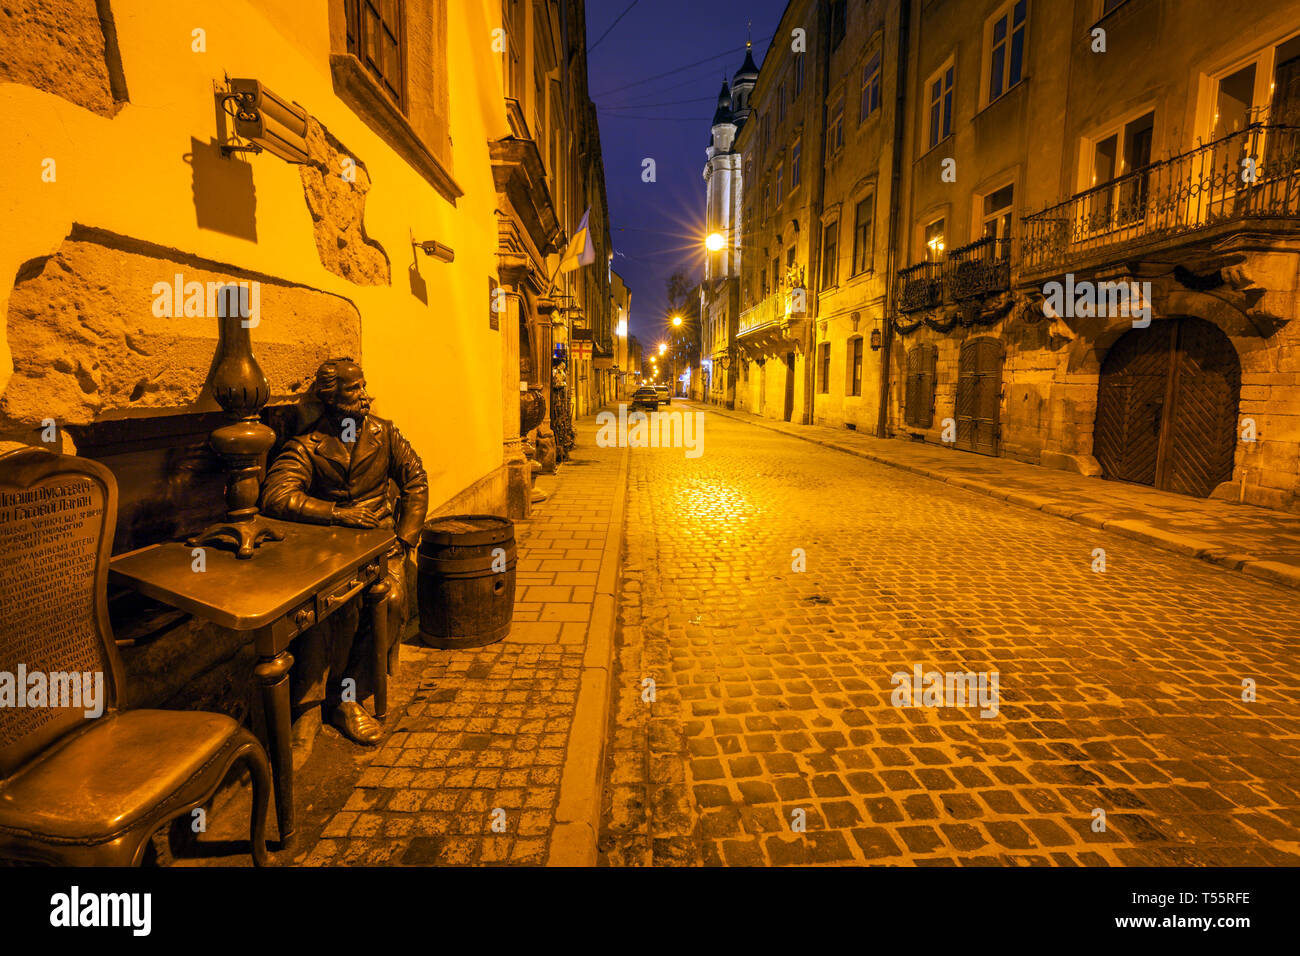 Sculpture of man sitting at table at night in Lviv, Ukraine Stock Photo